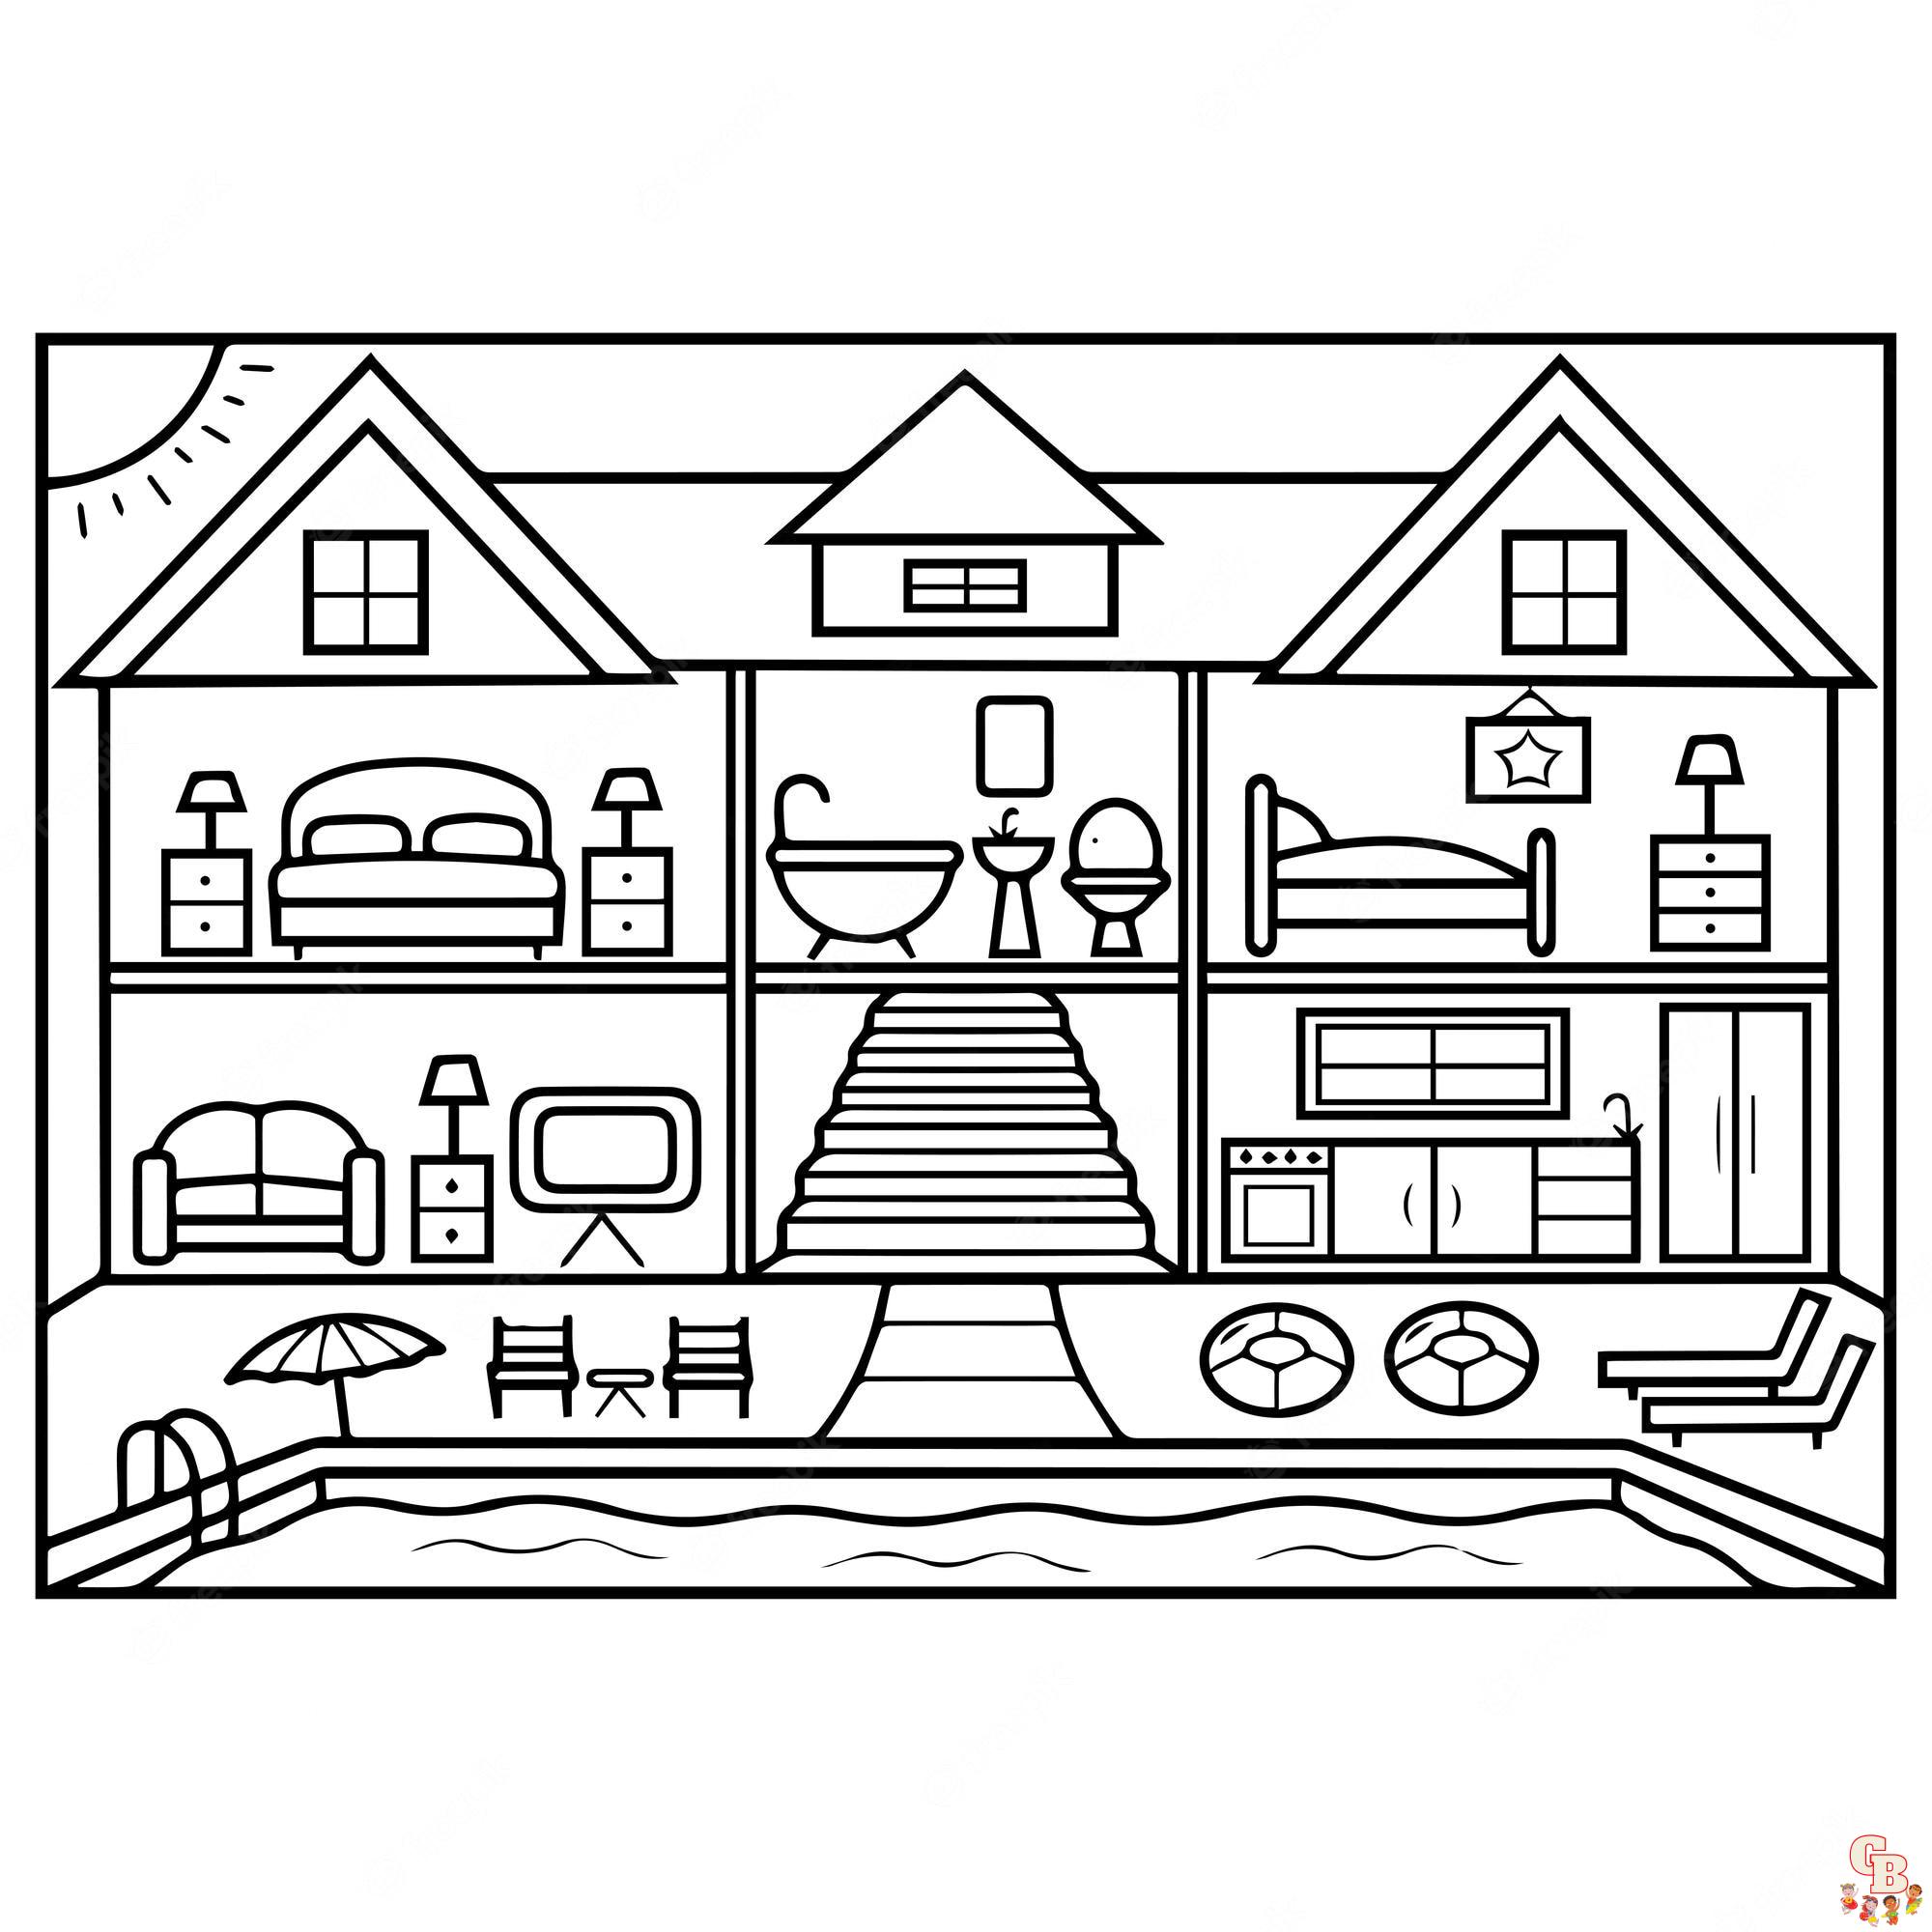 Doll House Coloring Pages for Kids | GBcoloring